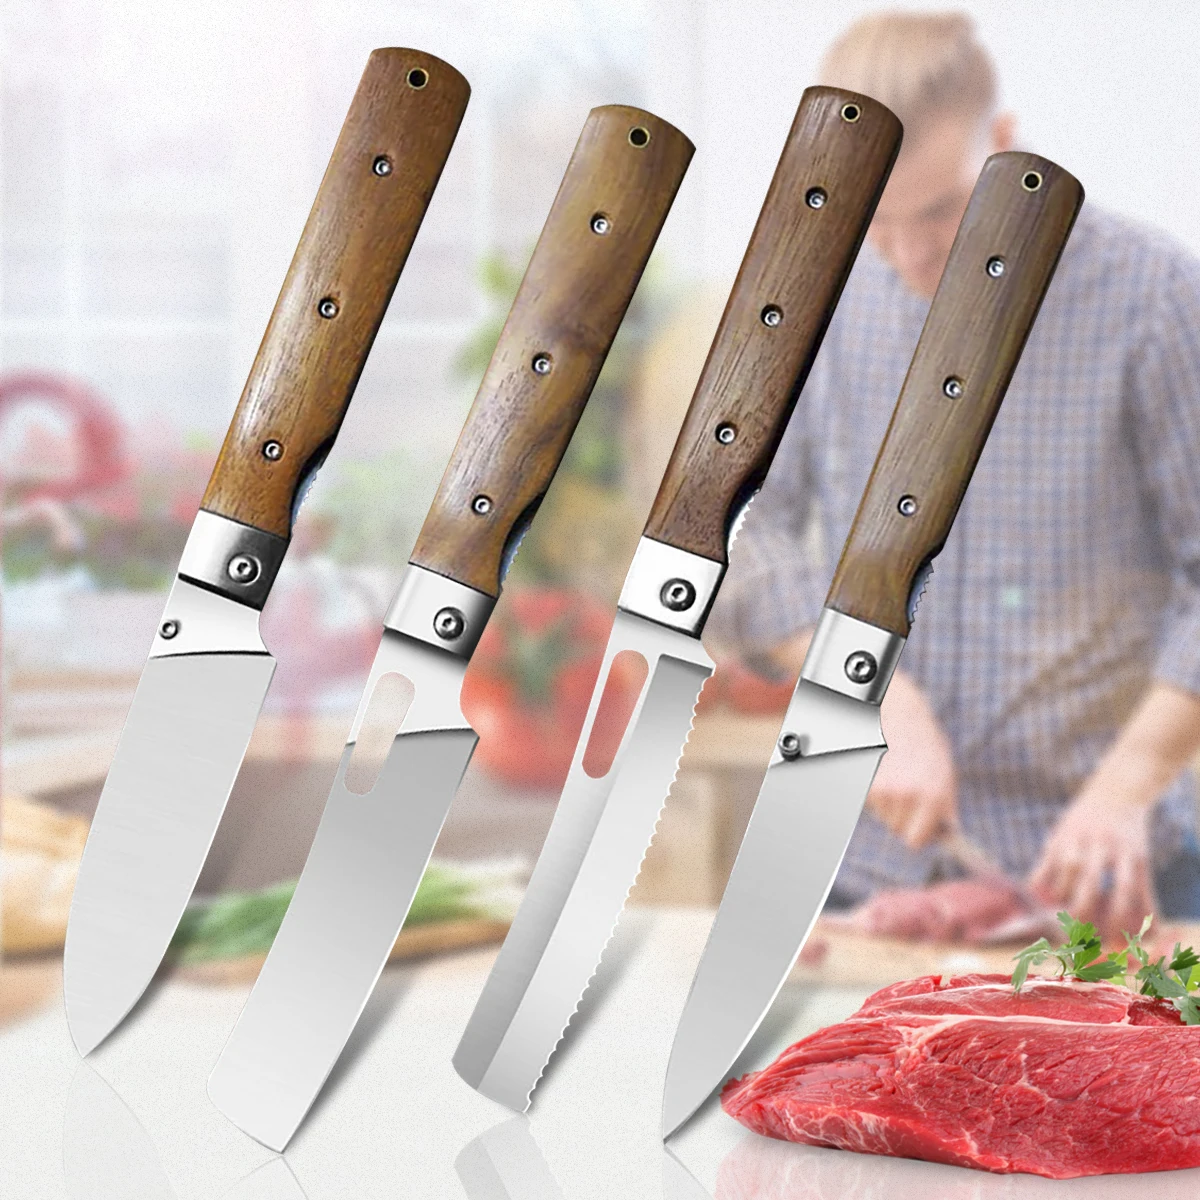 https://ae01.alicdn.com/kf/S80c4062e89db4c5f8cb0f9a7ef6ecee1s/Meat-Cleaver-Utility-Fruit-Vegetable-Cutter-Stainless-Steel-Boning-Knife-Small-Fruit-Meat-Cut-Knife.jpg